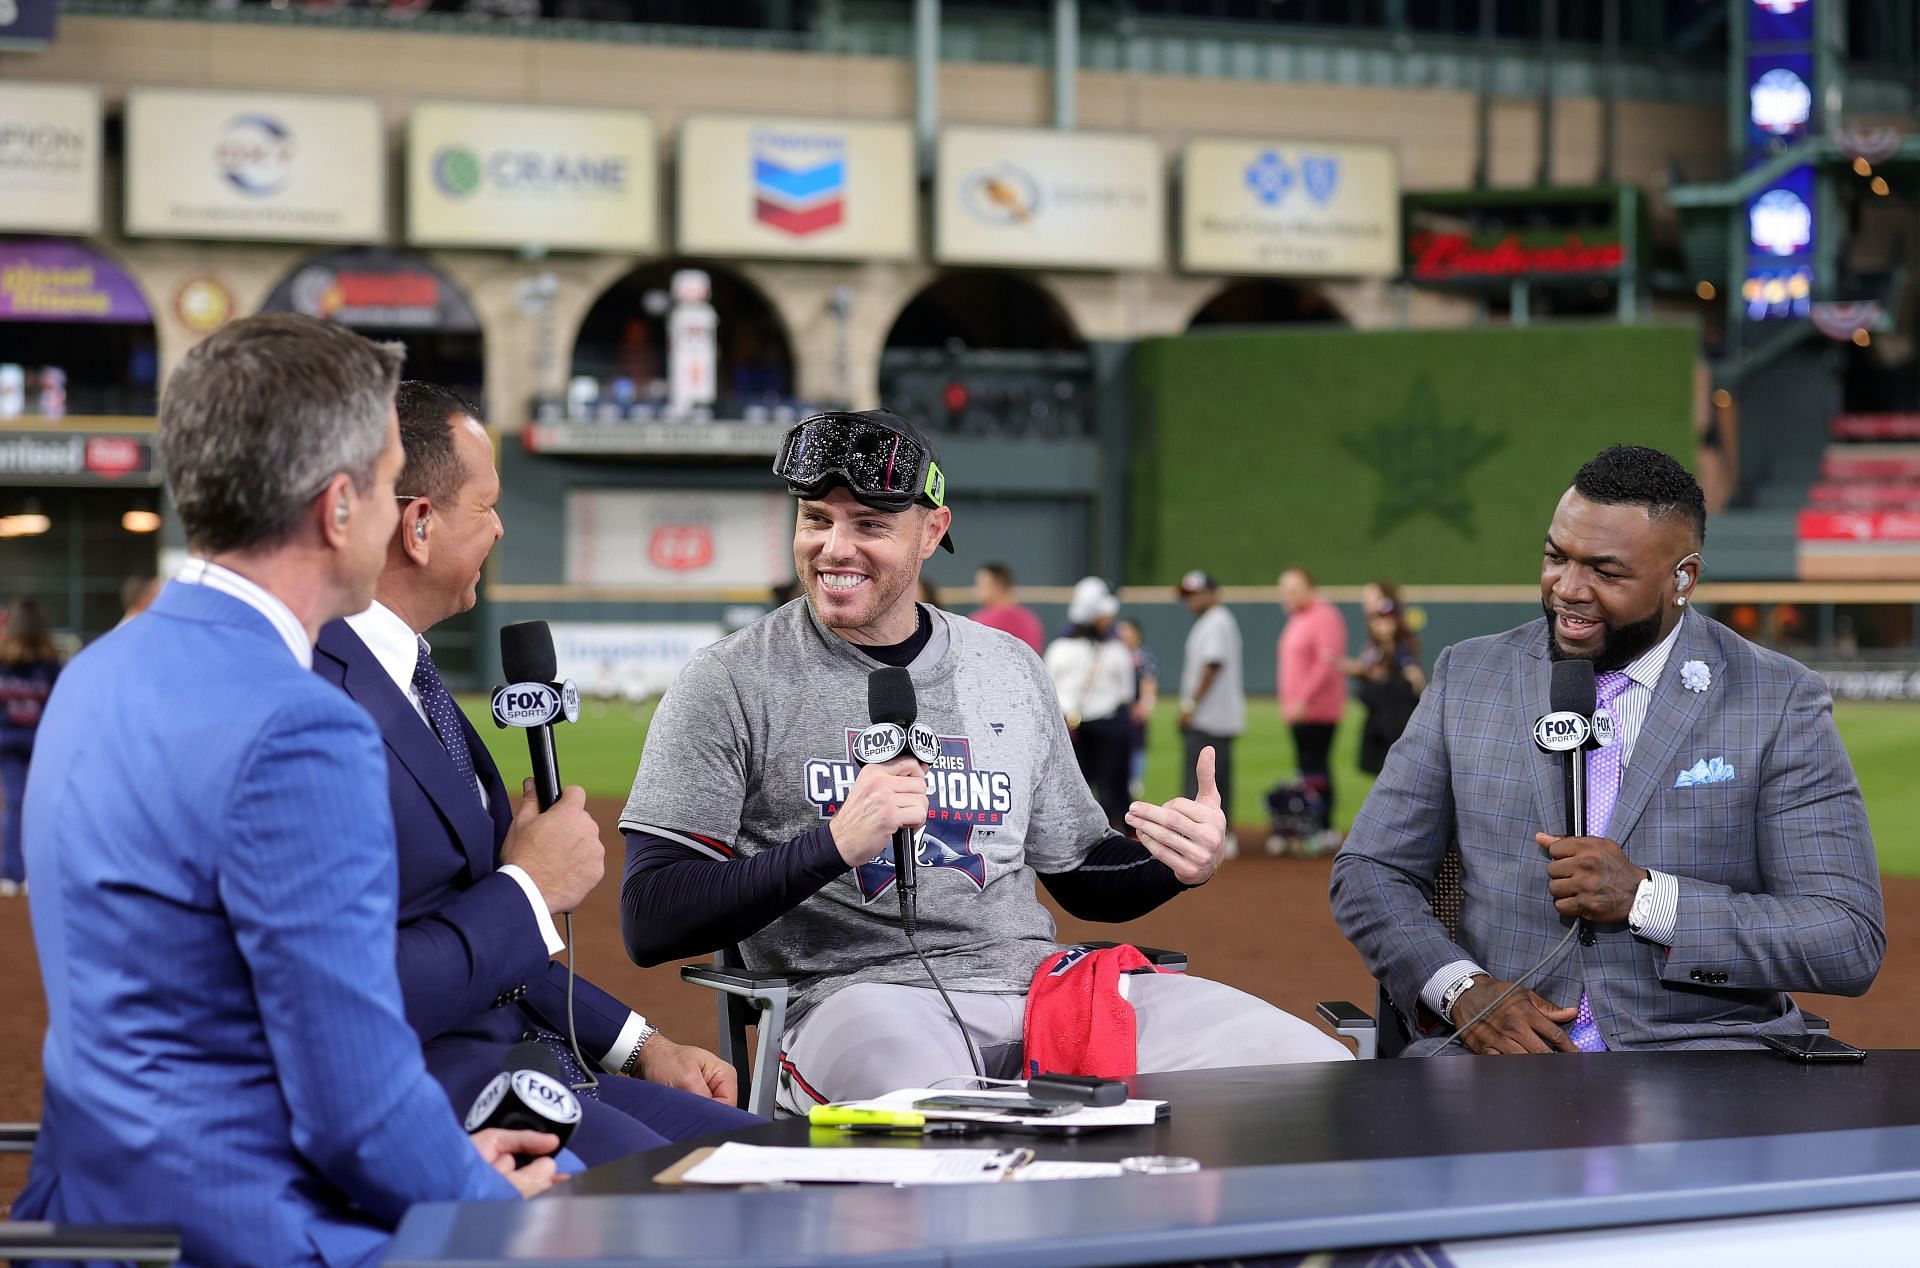 Alex Rodriguez and David Ortiz chat with Freddie Freeman during a broadcast.